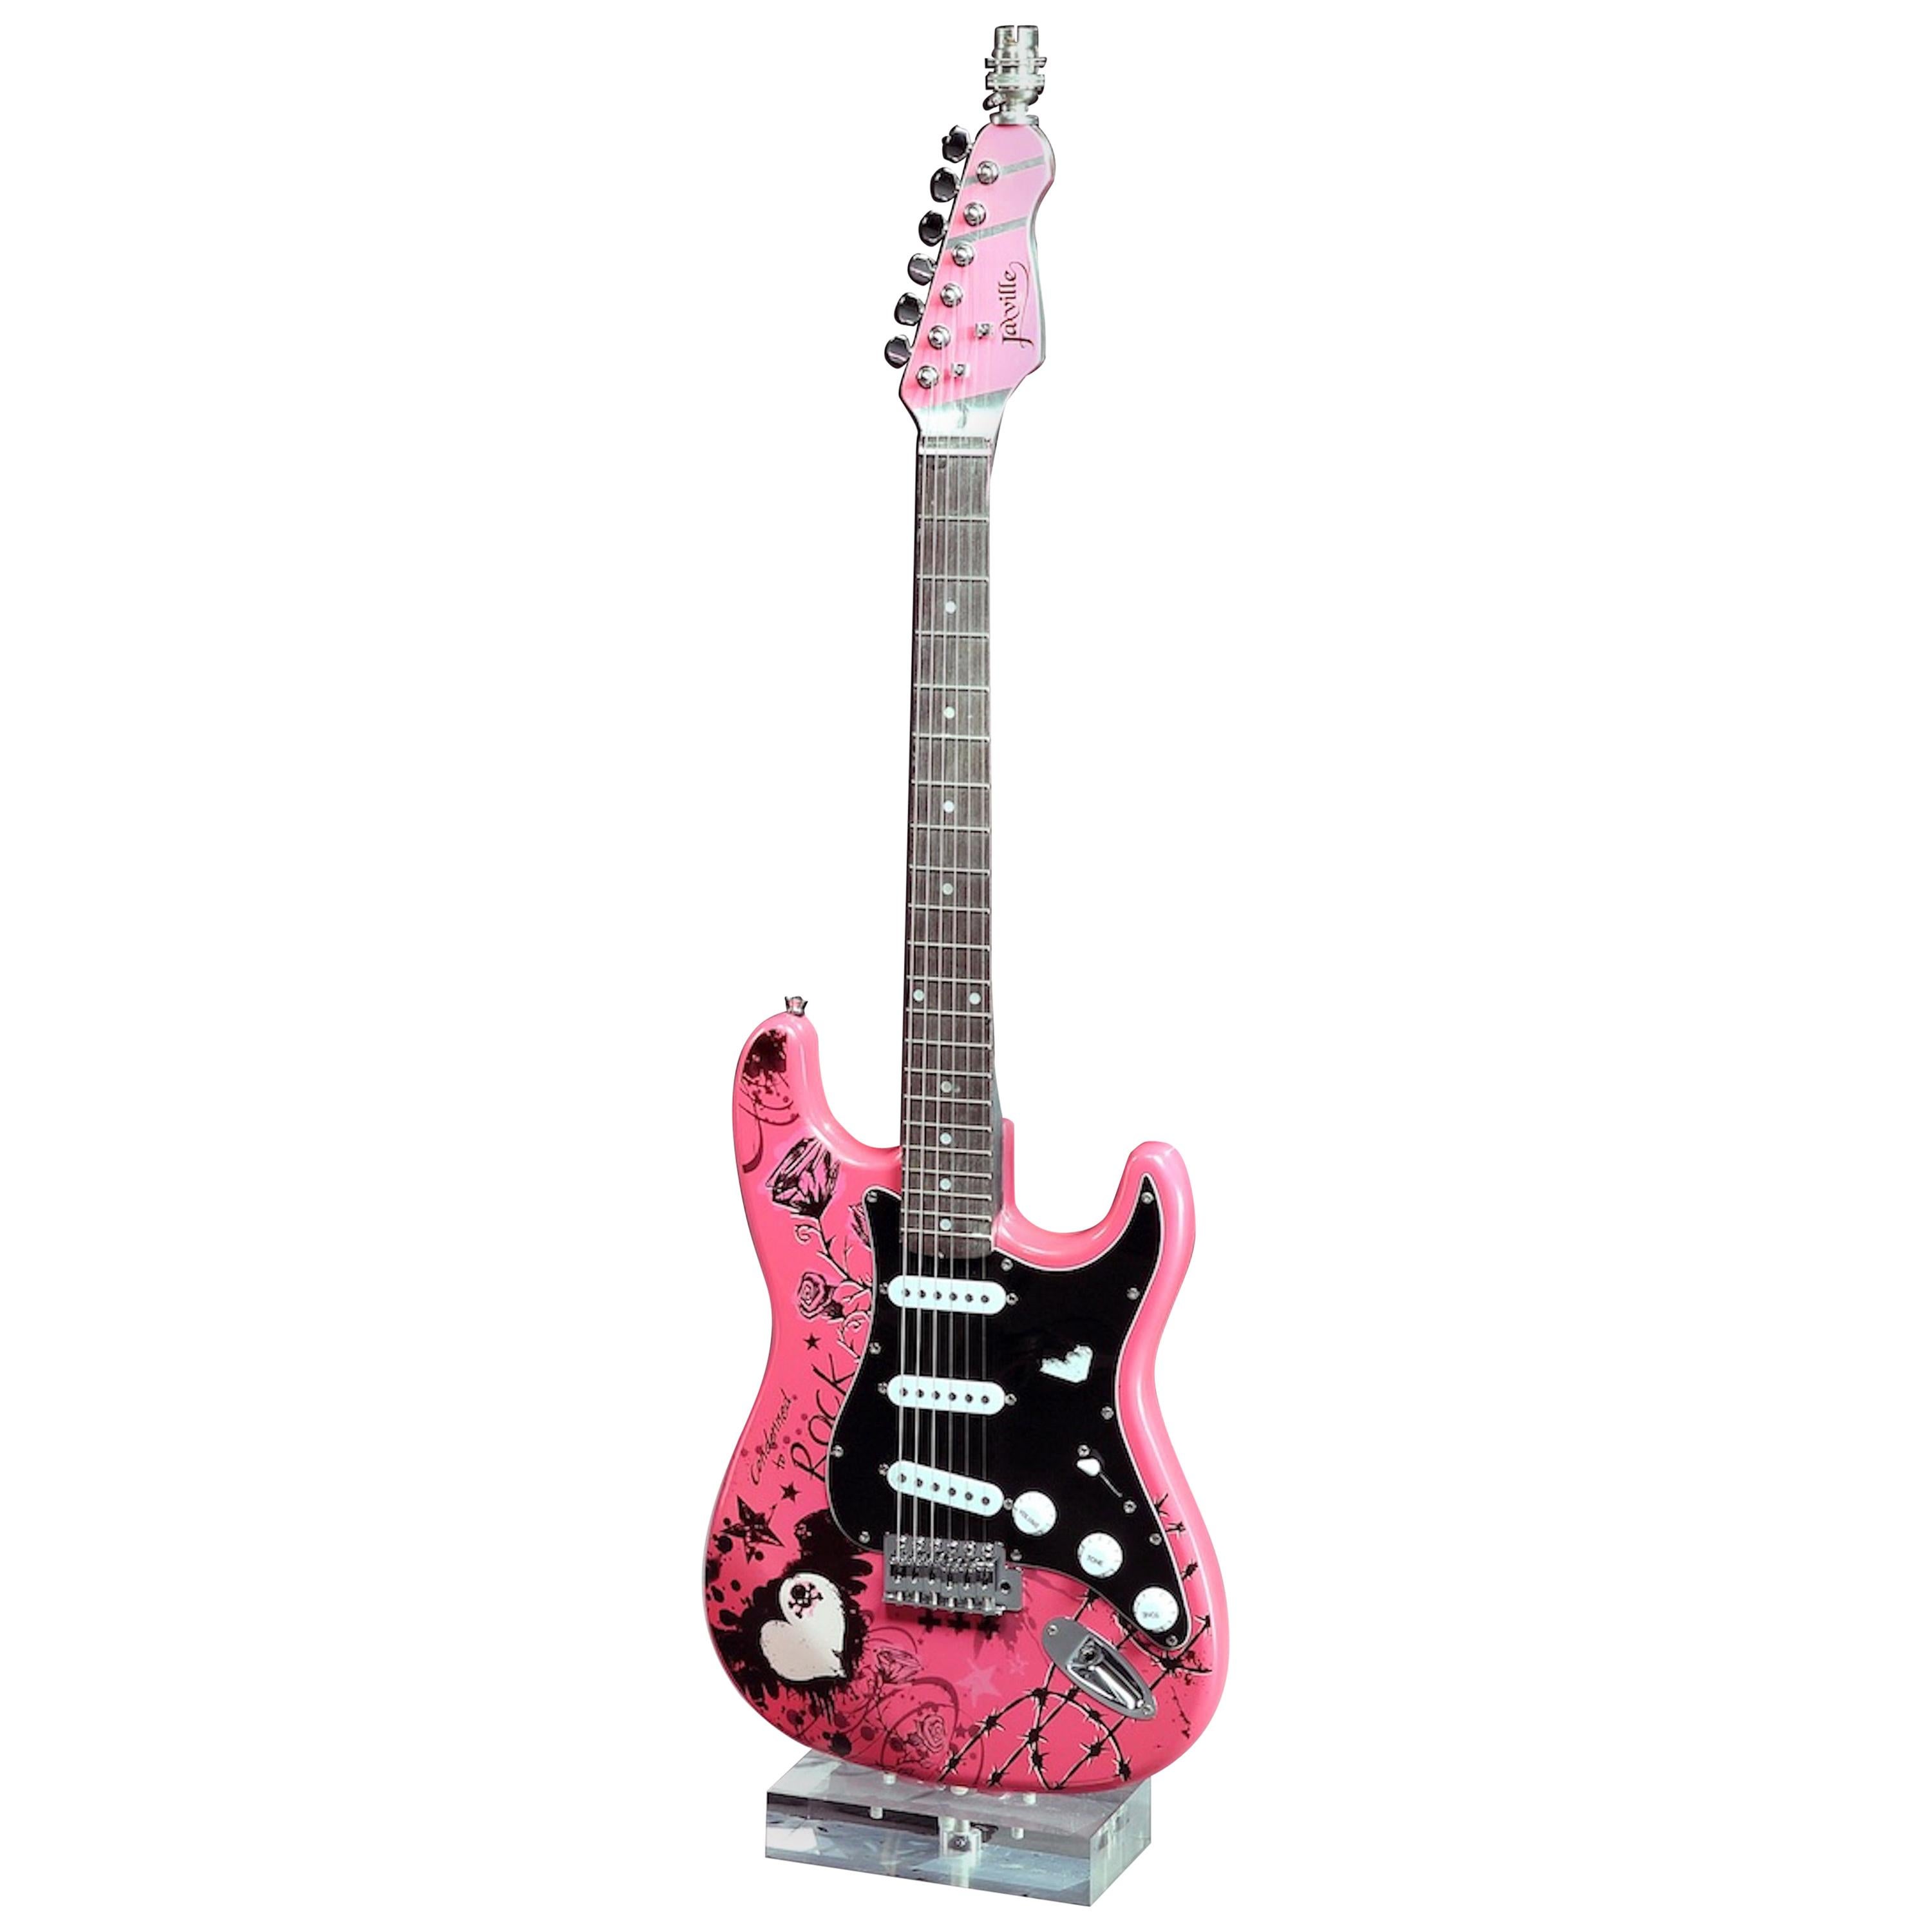 Lampe Guitar Electric Punk Bubble Gum Pink Condemned to Rock & Roll Chrome Maple